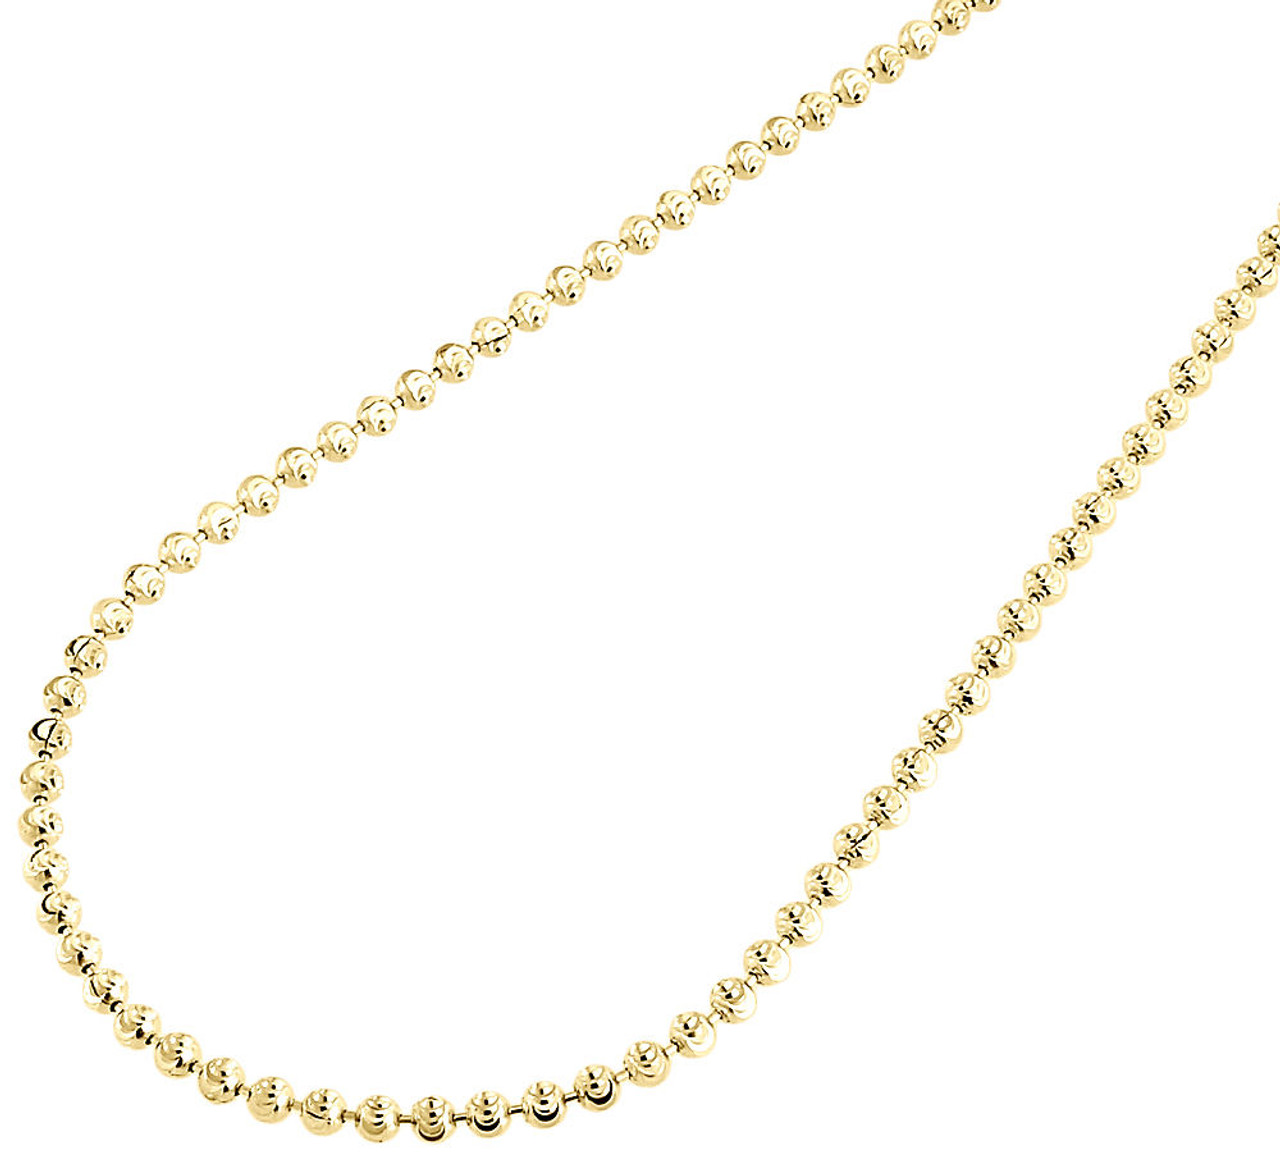 10k Yellow Gold Moon Cut Style Link New Solid Chain Necklace (2.5mm) 22" - 36"